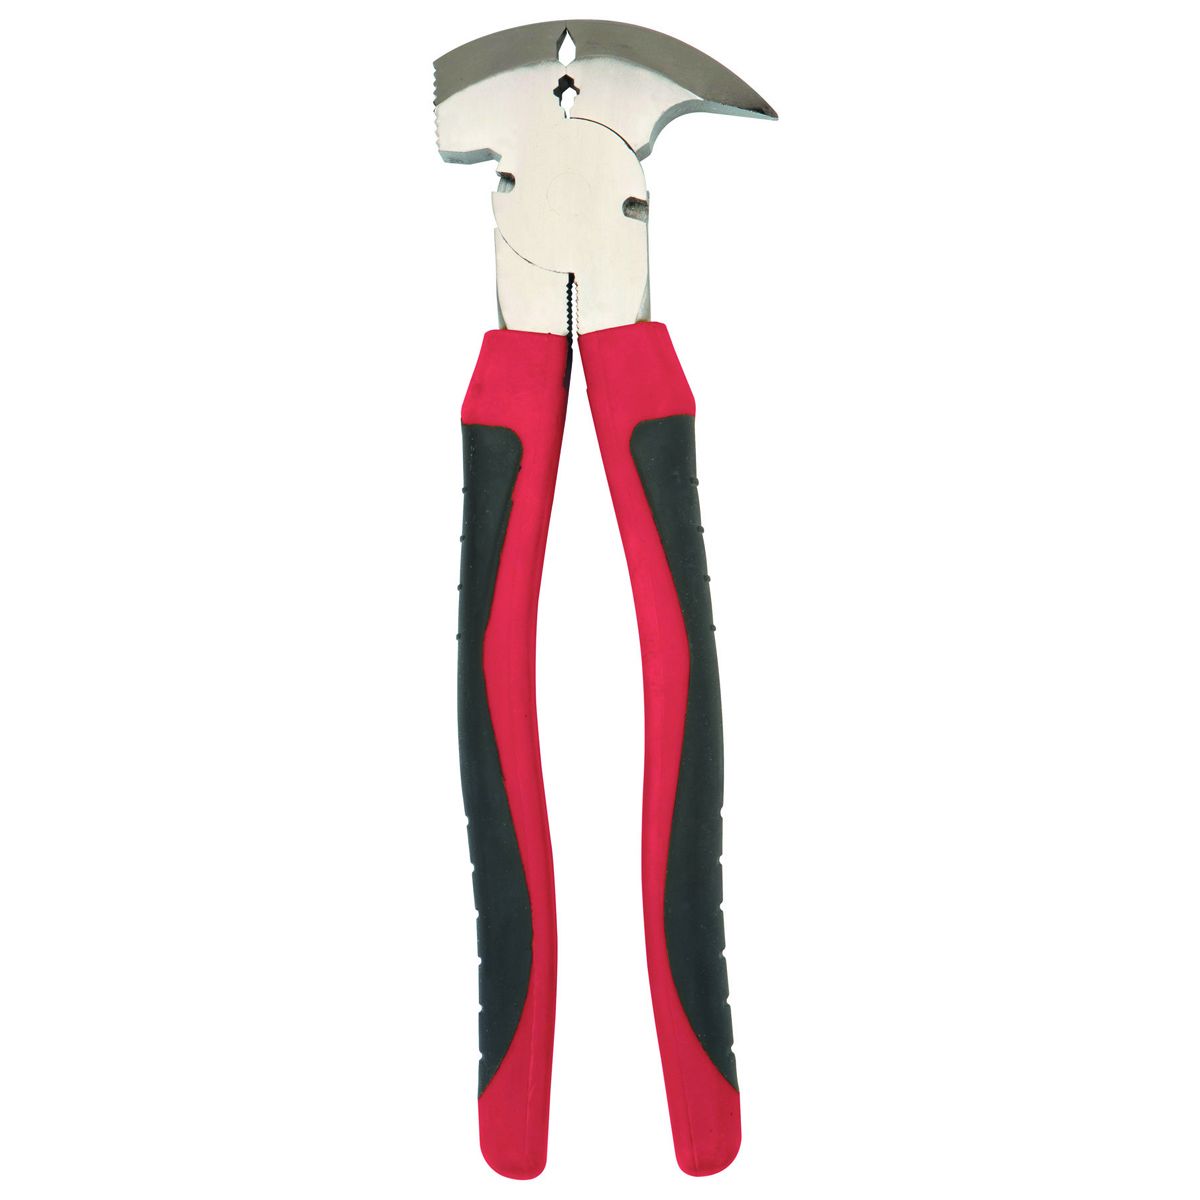 PITTSBURGH 10" Fence Pliers/Stapler Puller with TPR Grip